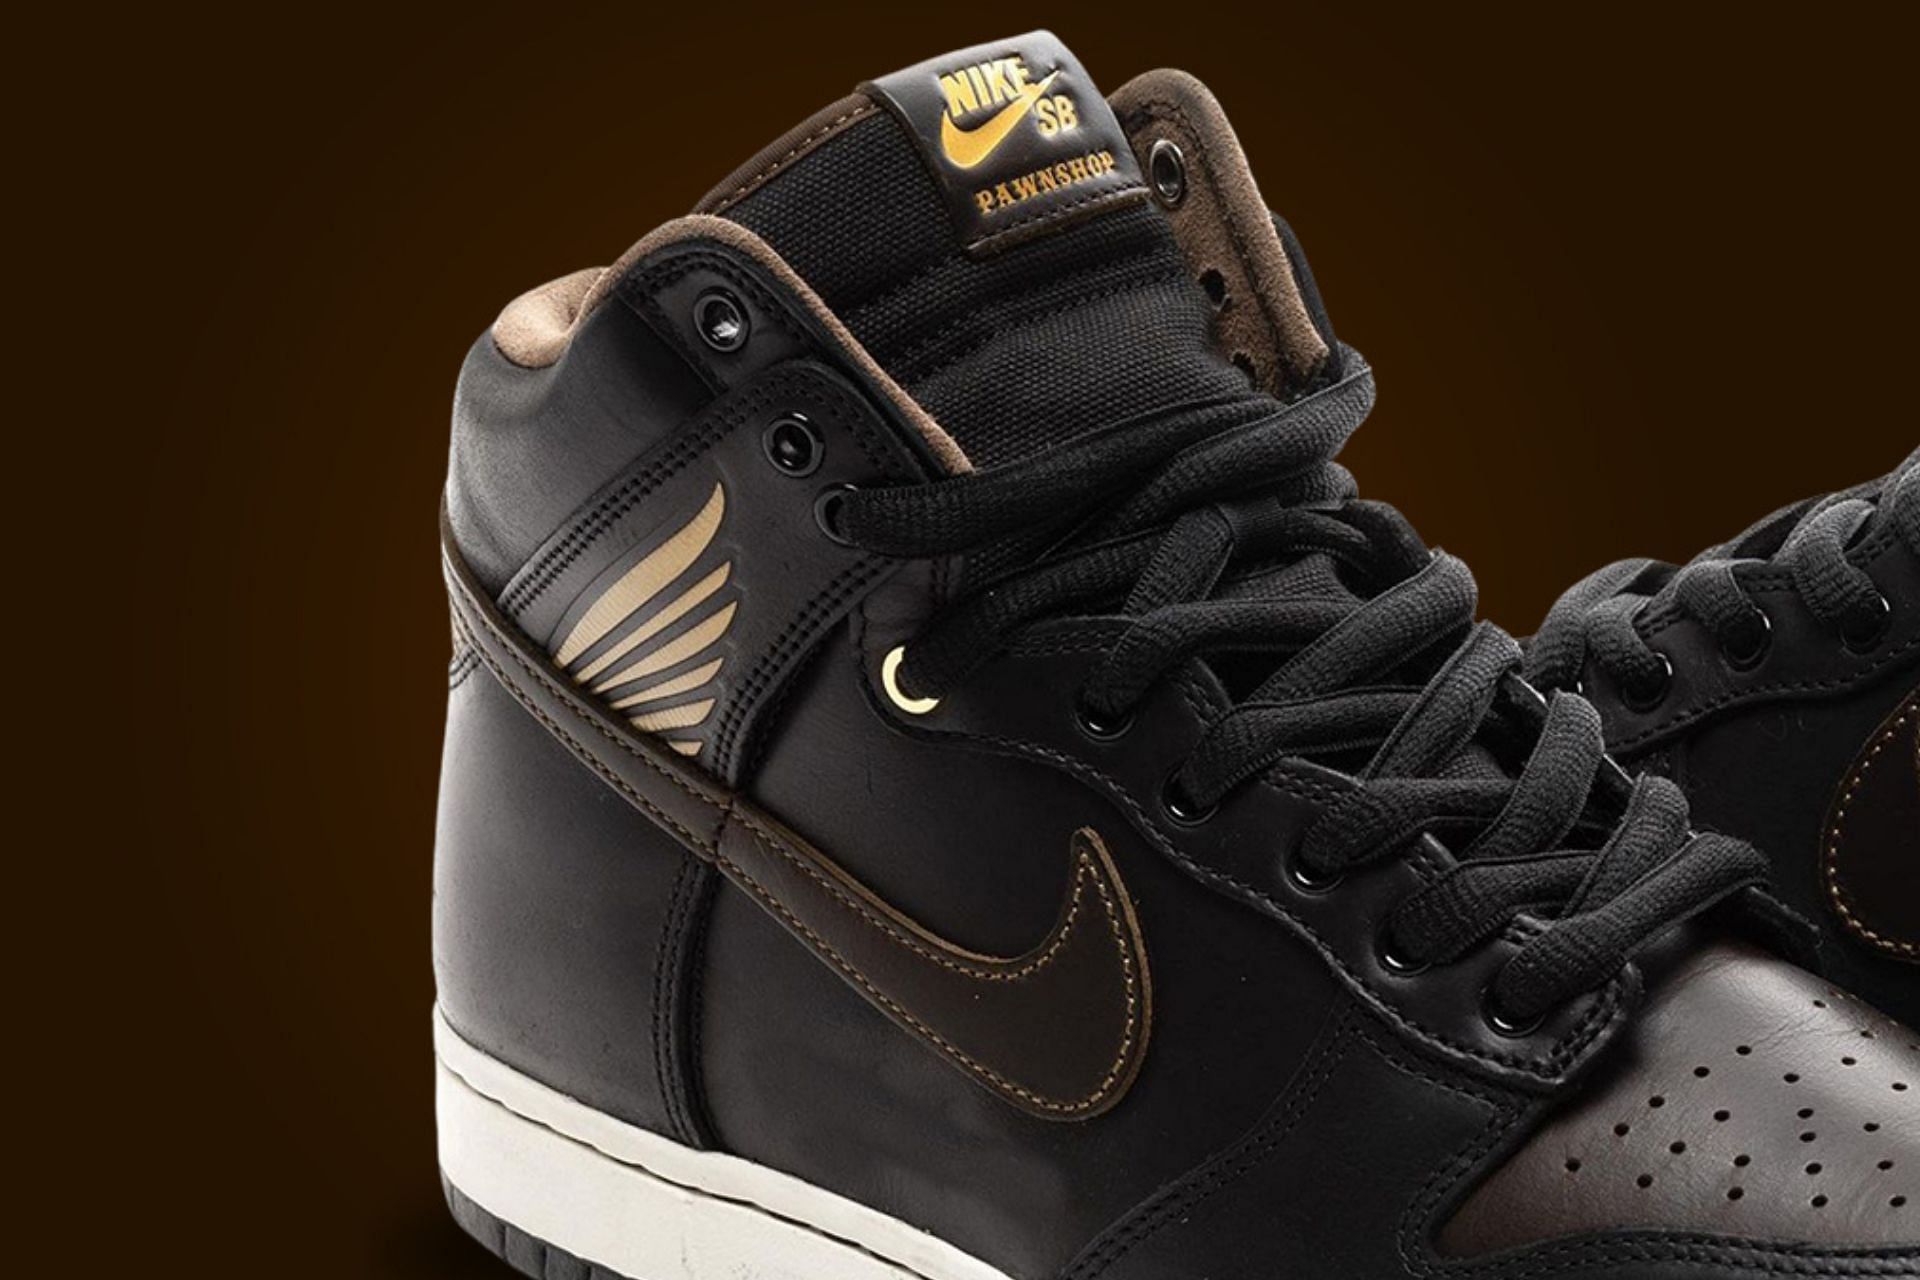 Where to buy Pawnshop Skate x Nike SB Dunk High shoes? Price and